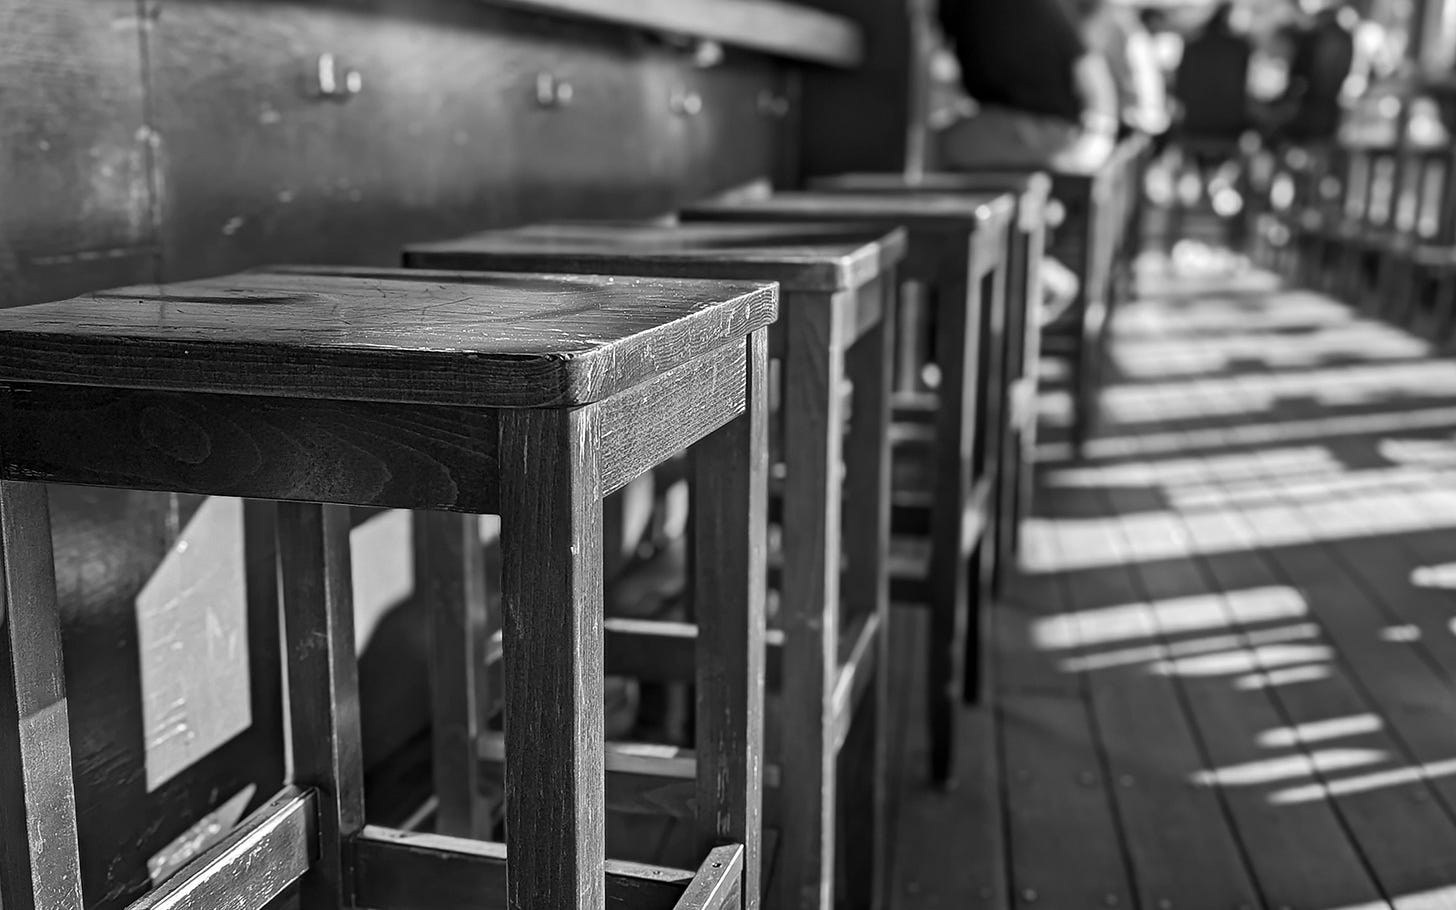 Stools sun themselves on a quiet afternoon at the local pub